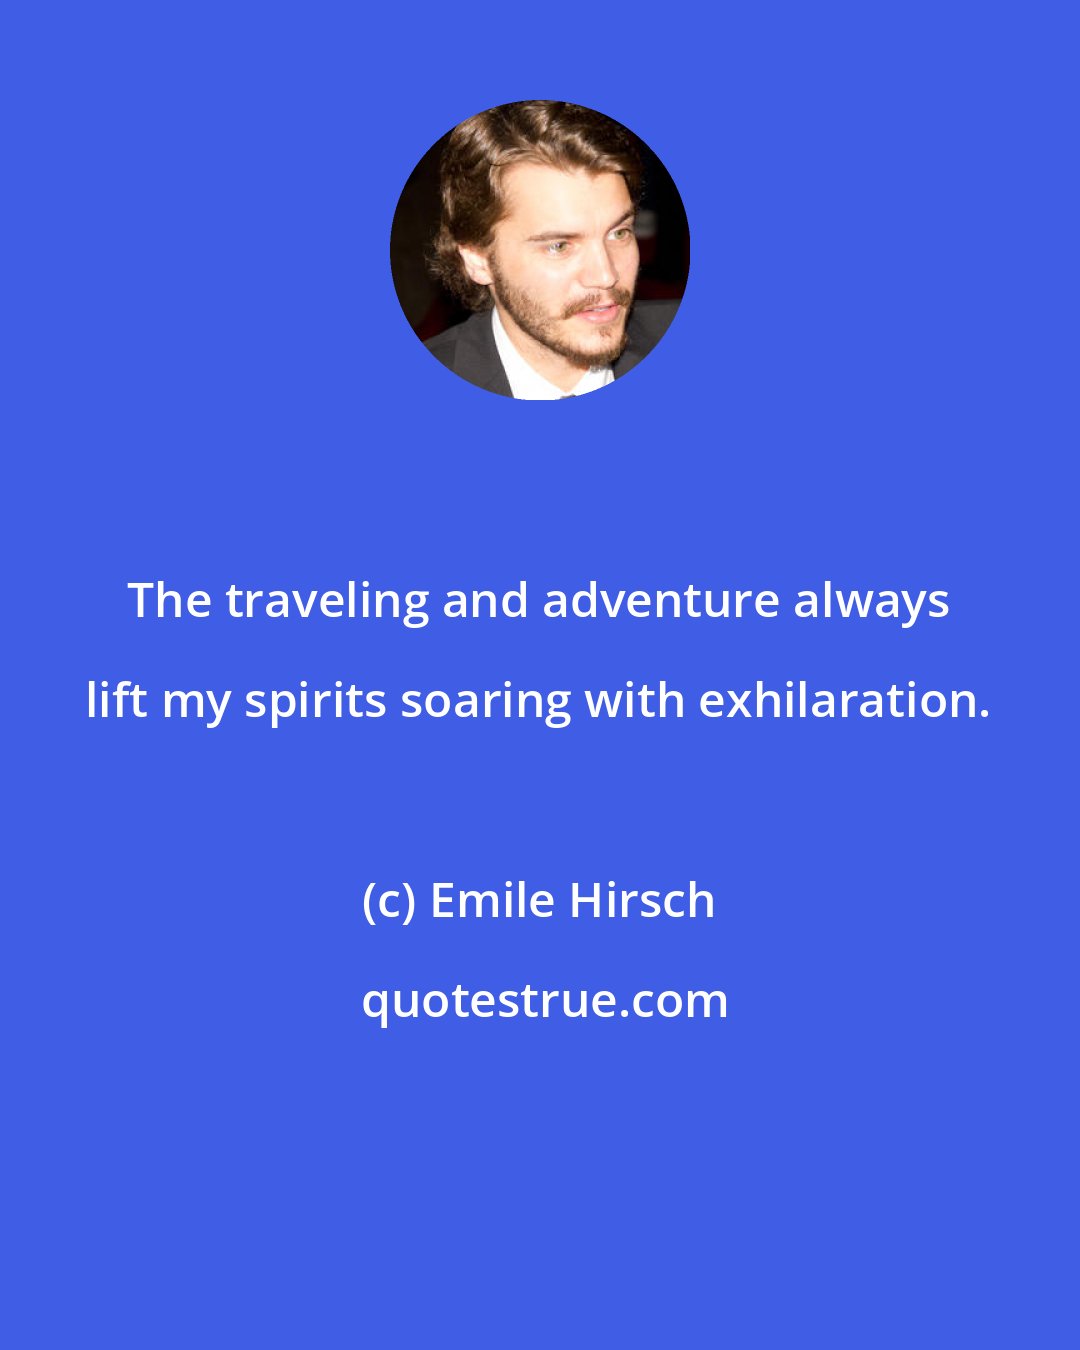 Emile Hirsch: The traveling and adventure always lift my spirits soaring with exhilaration.